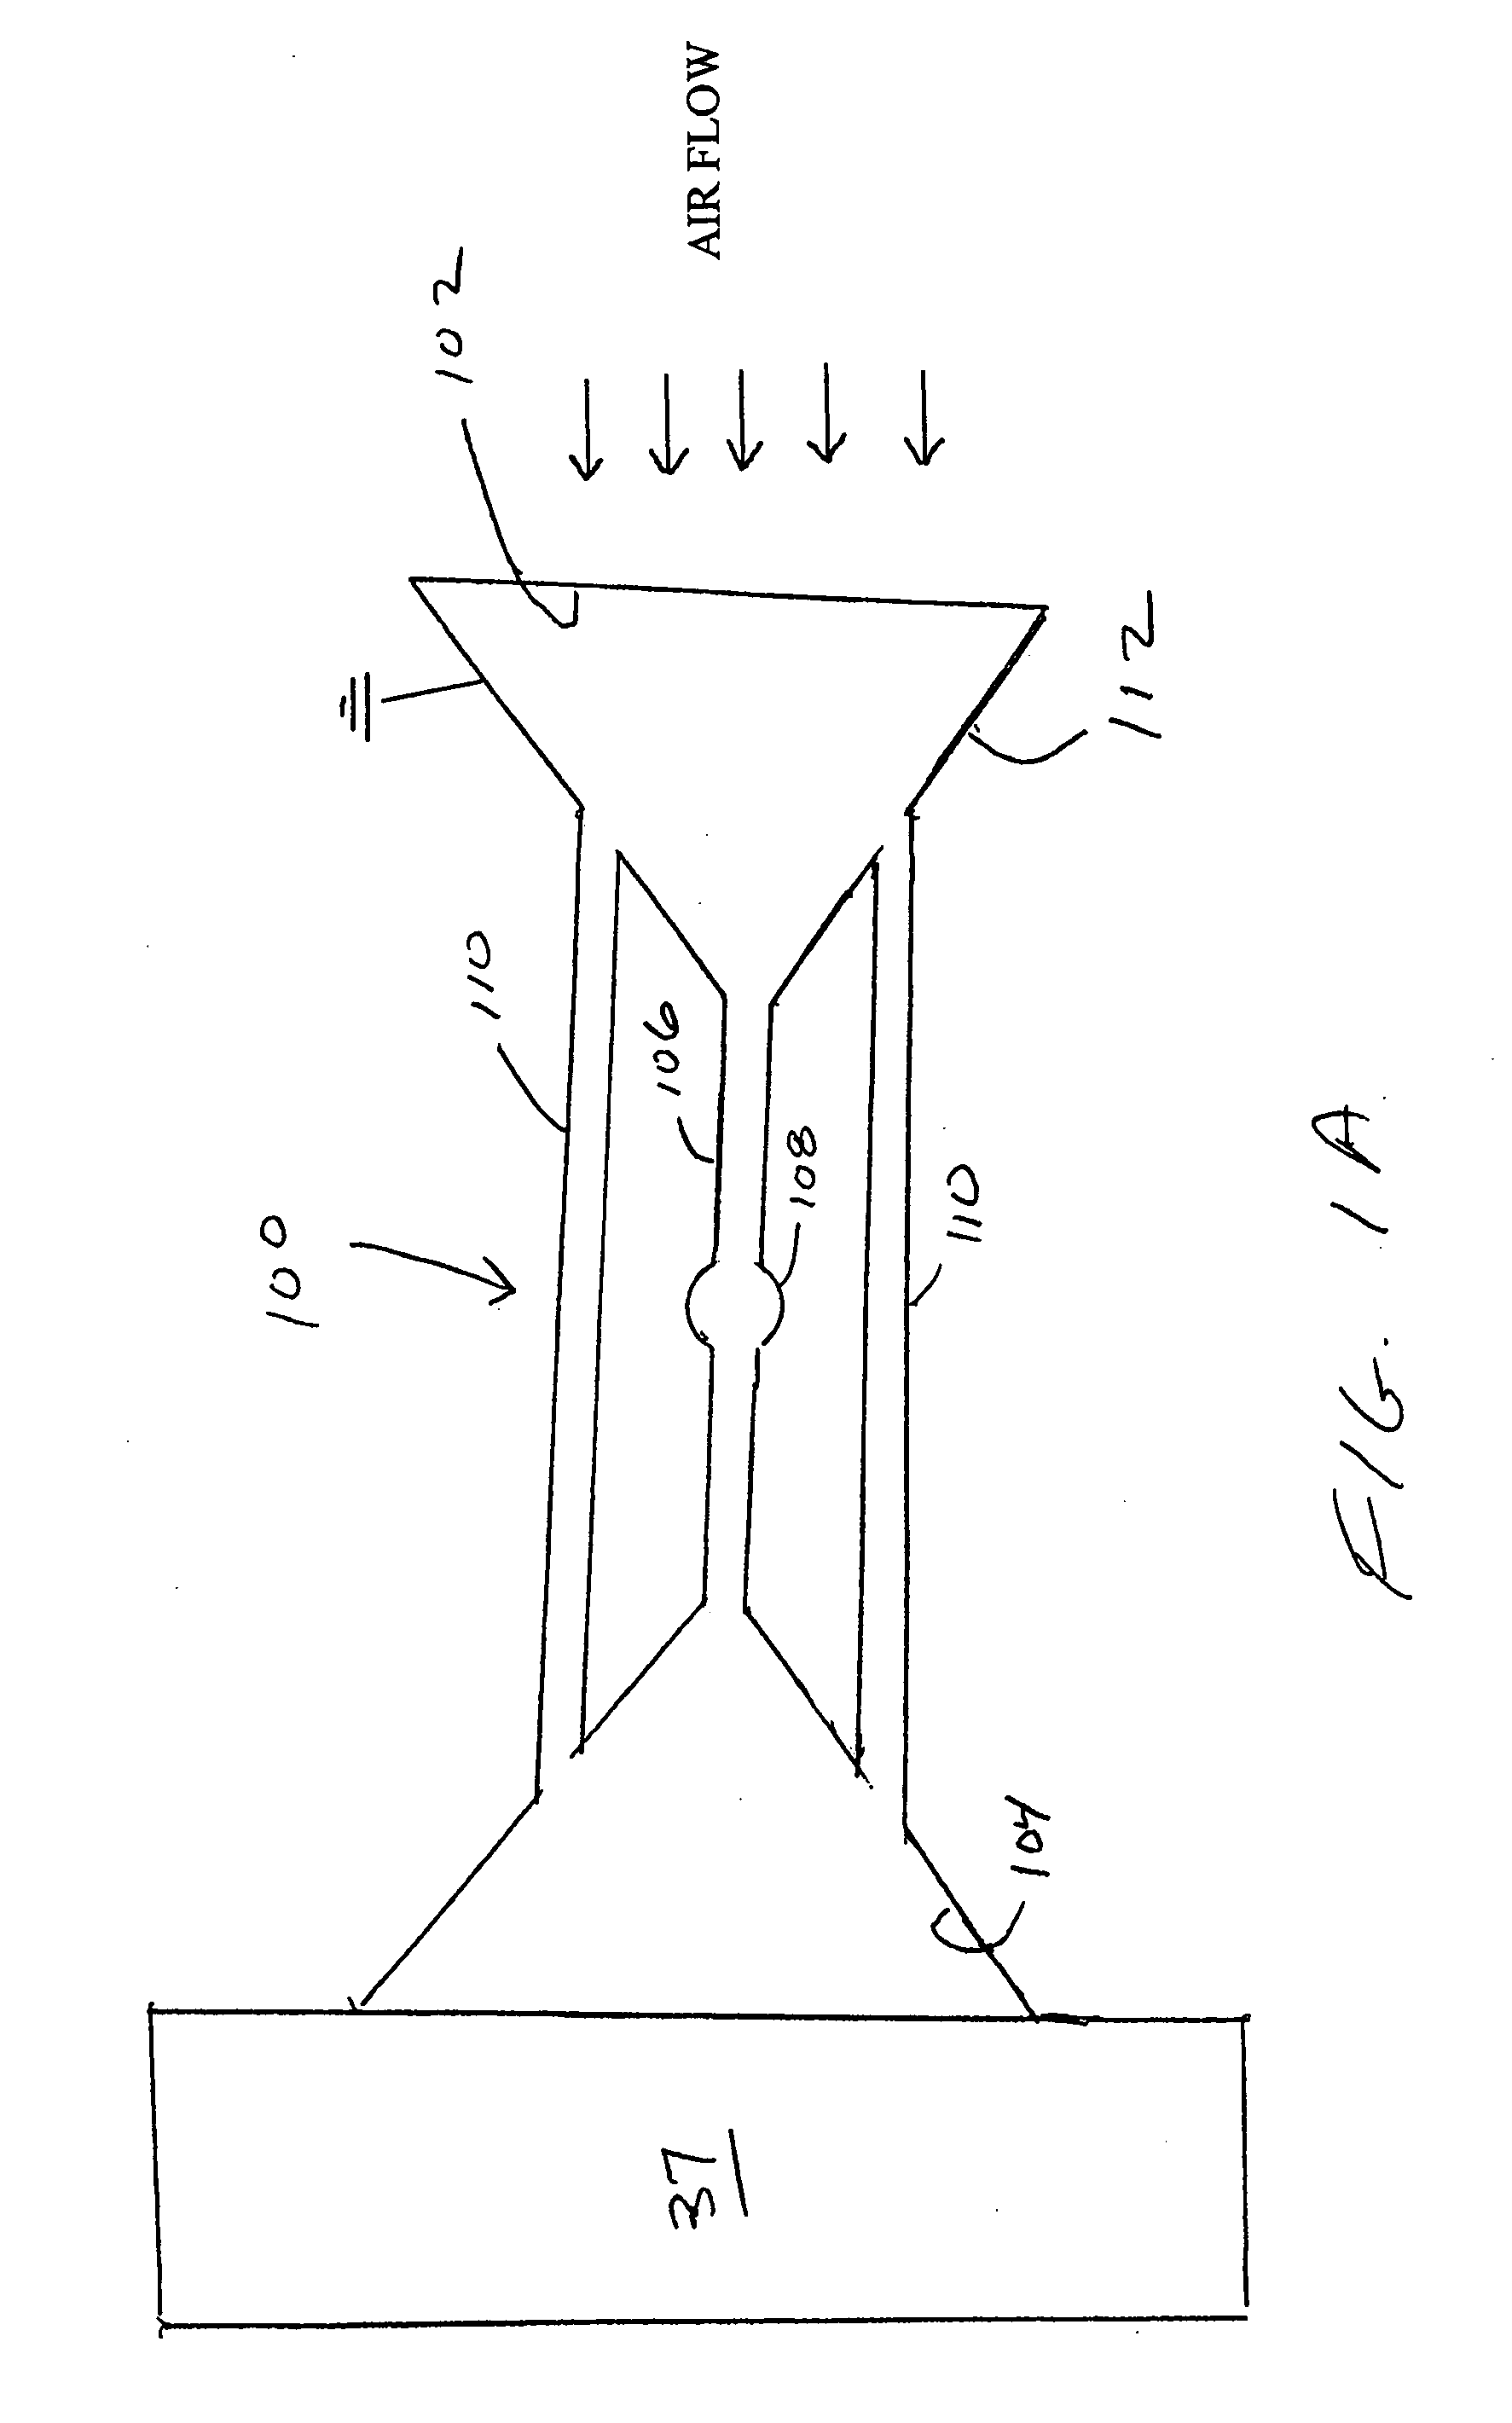 Pathogen and particle detector system and method